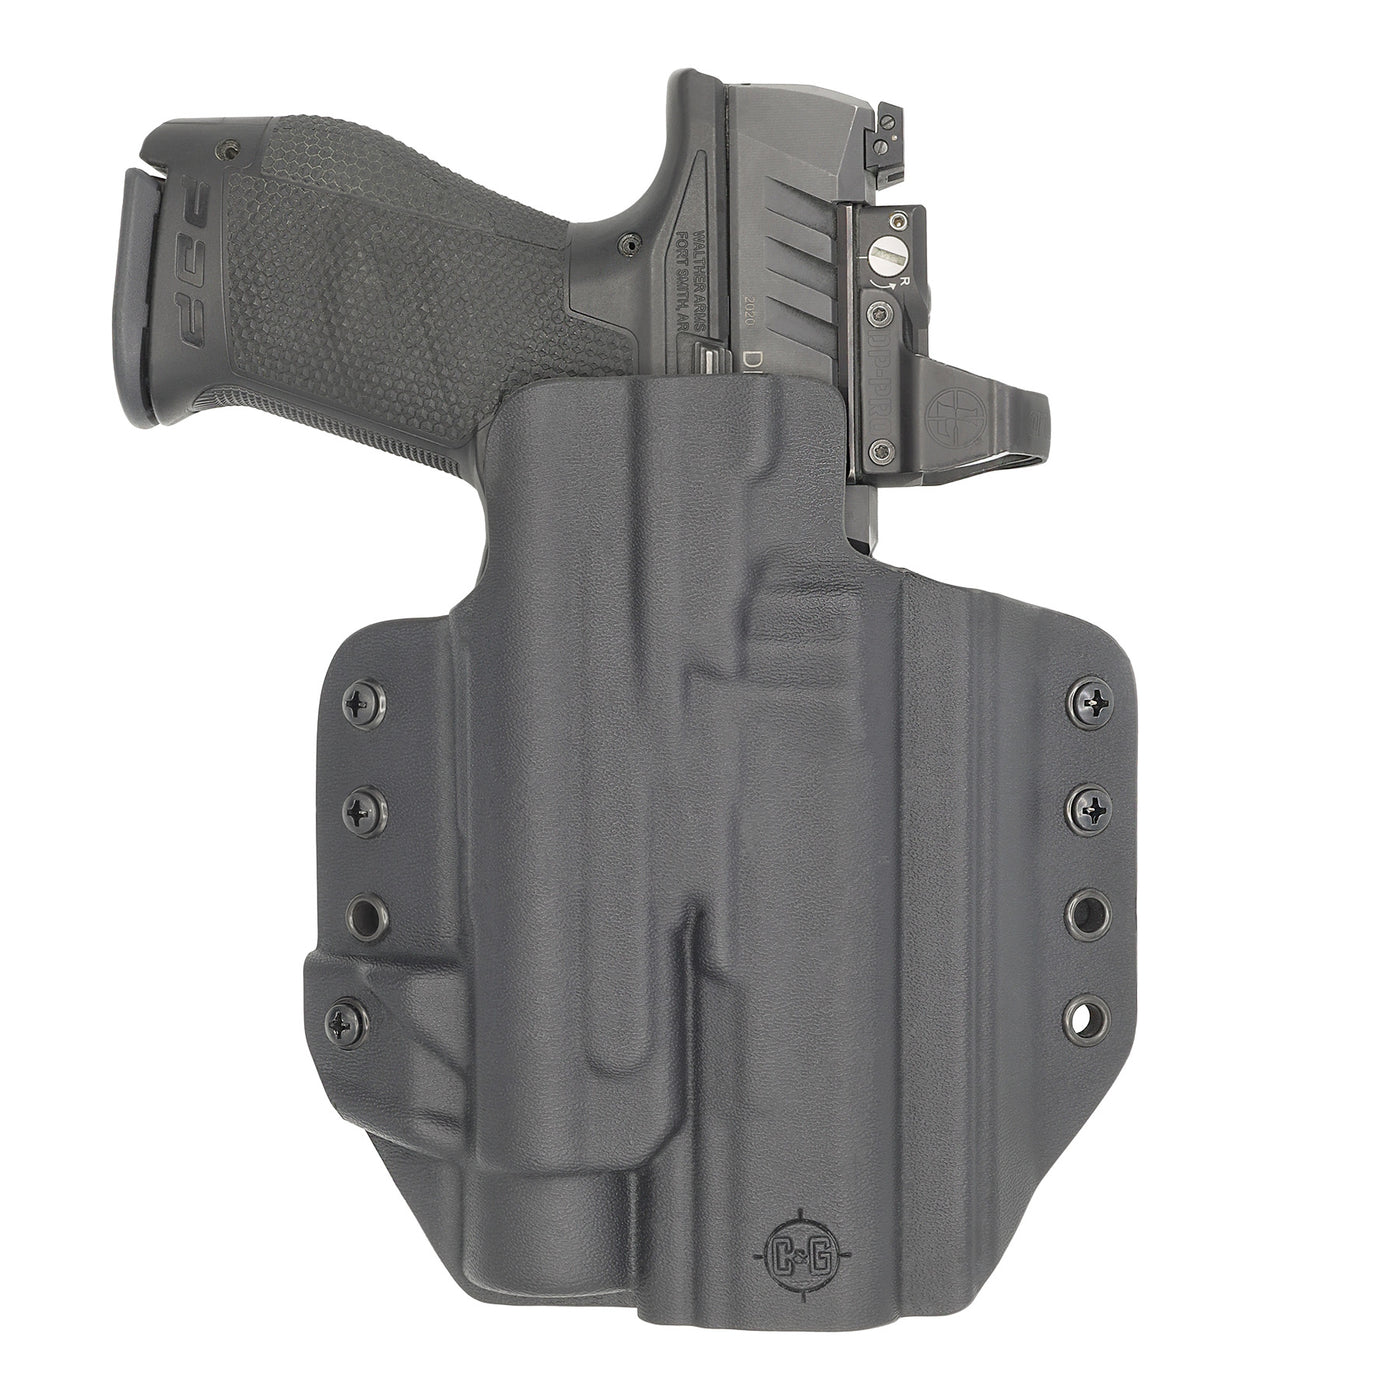 C&G Holsters custom OWB Tactical M&P 10/45 Streamlight TLR1 in holstered position